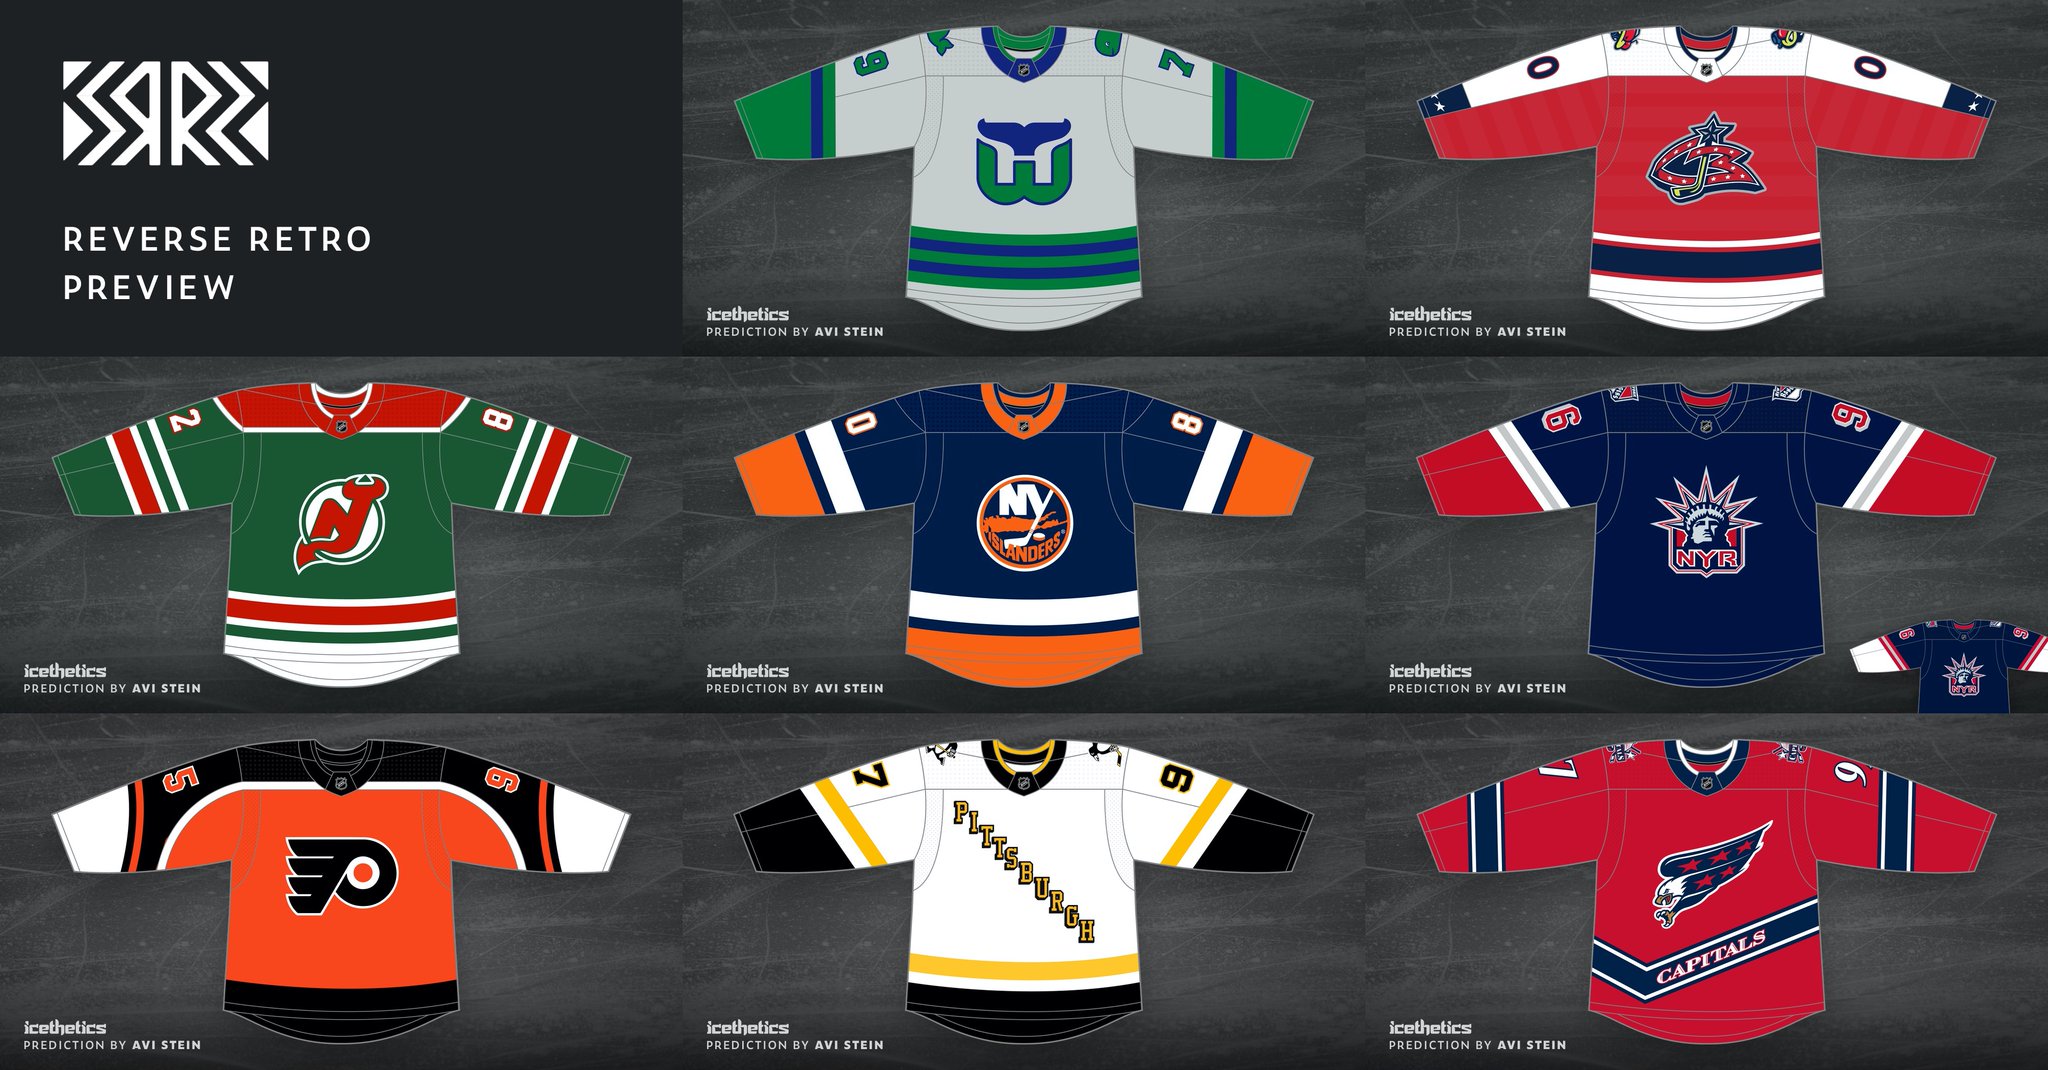 Report: NHL's Rumored “Reverse Retro” (Fourth Jersey) Series For